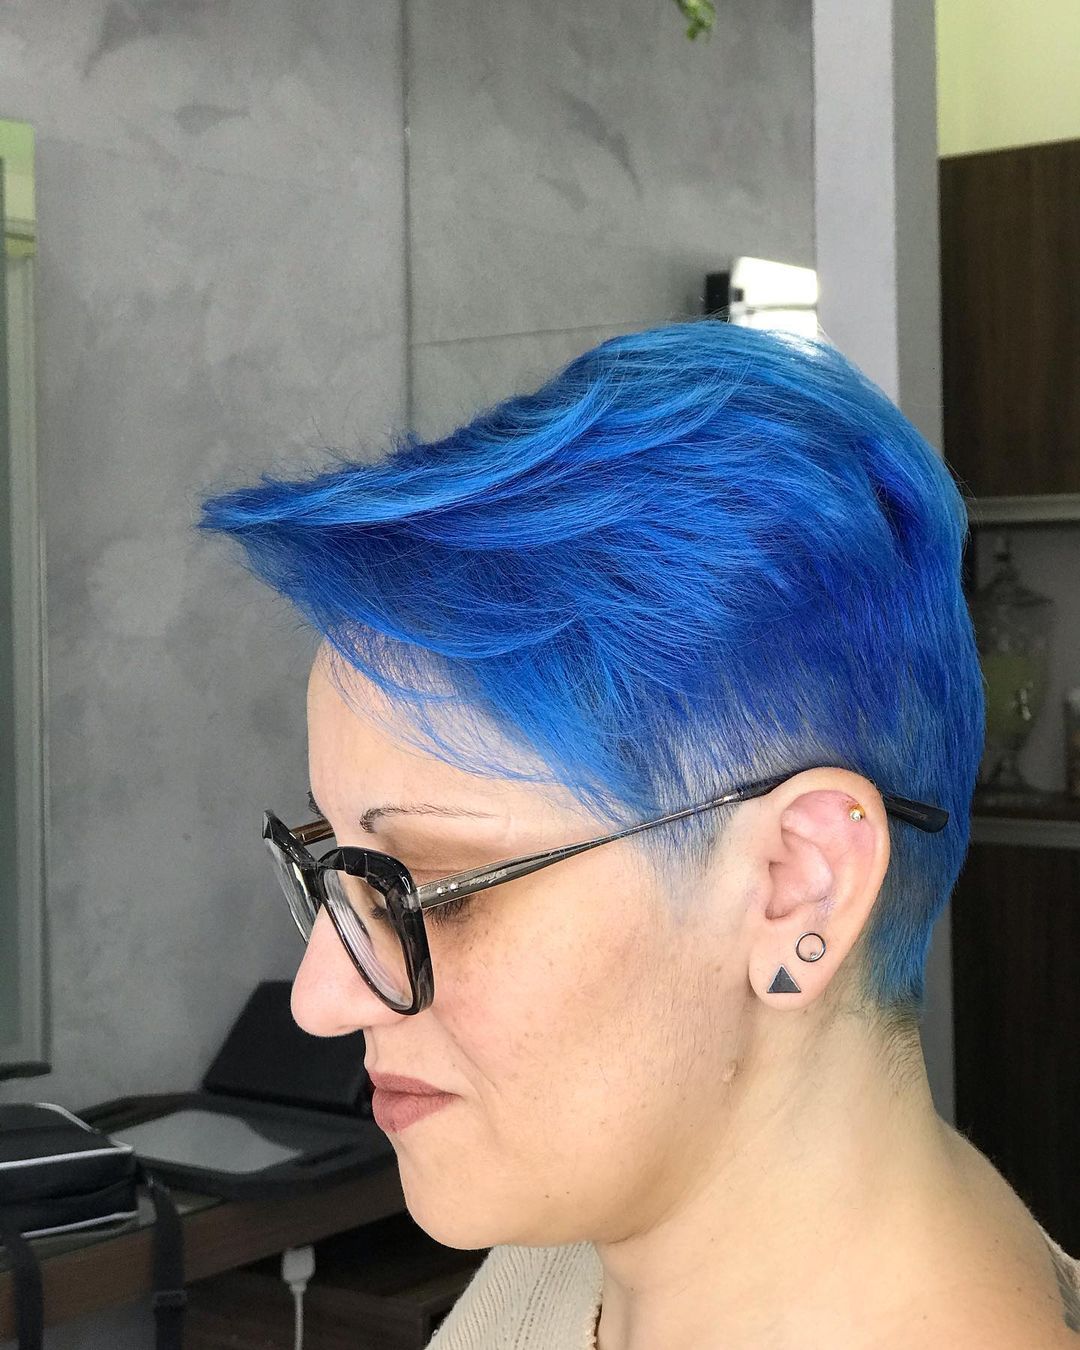 25 Best Blue Hair Ideas and Colors for Light or Dark Hair in 2023